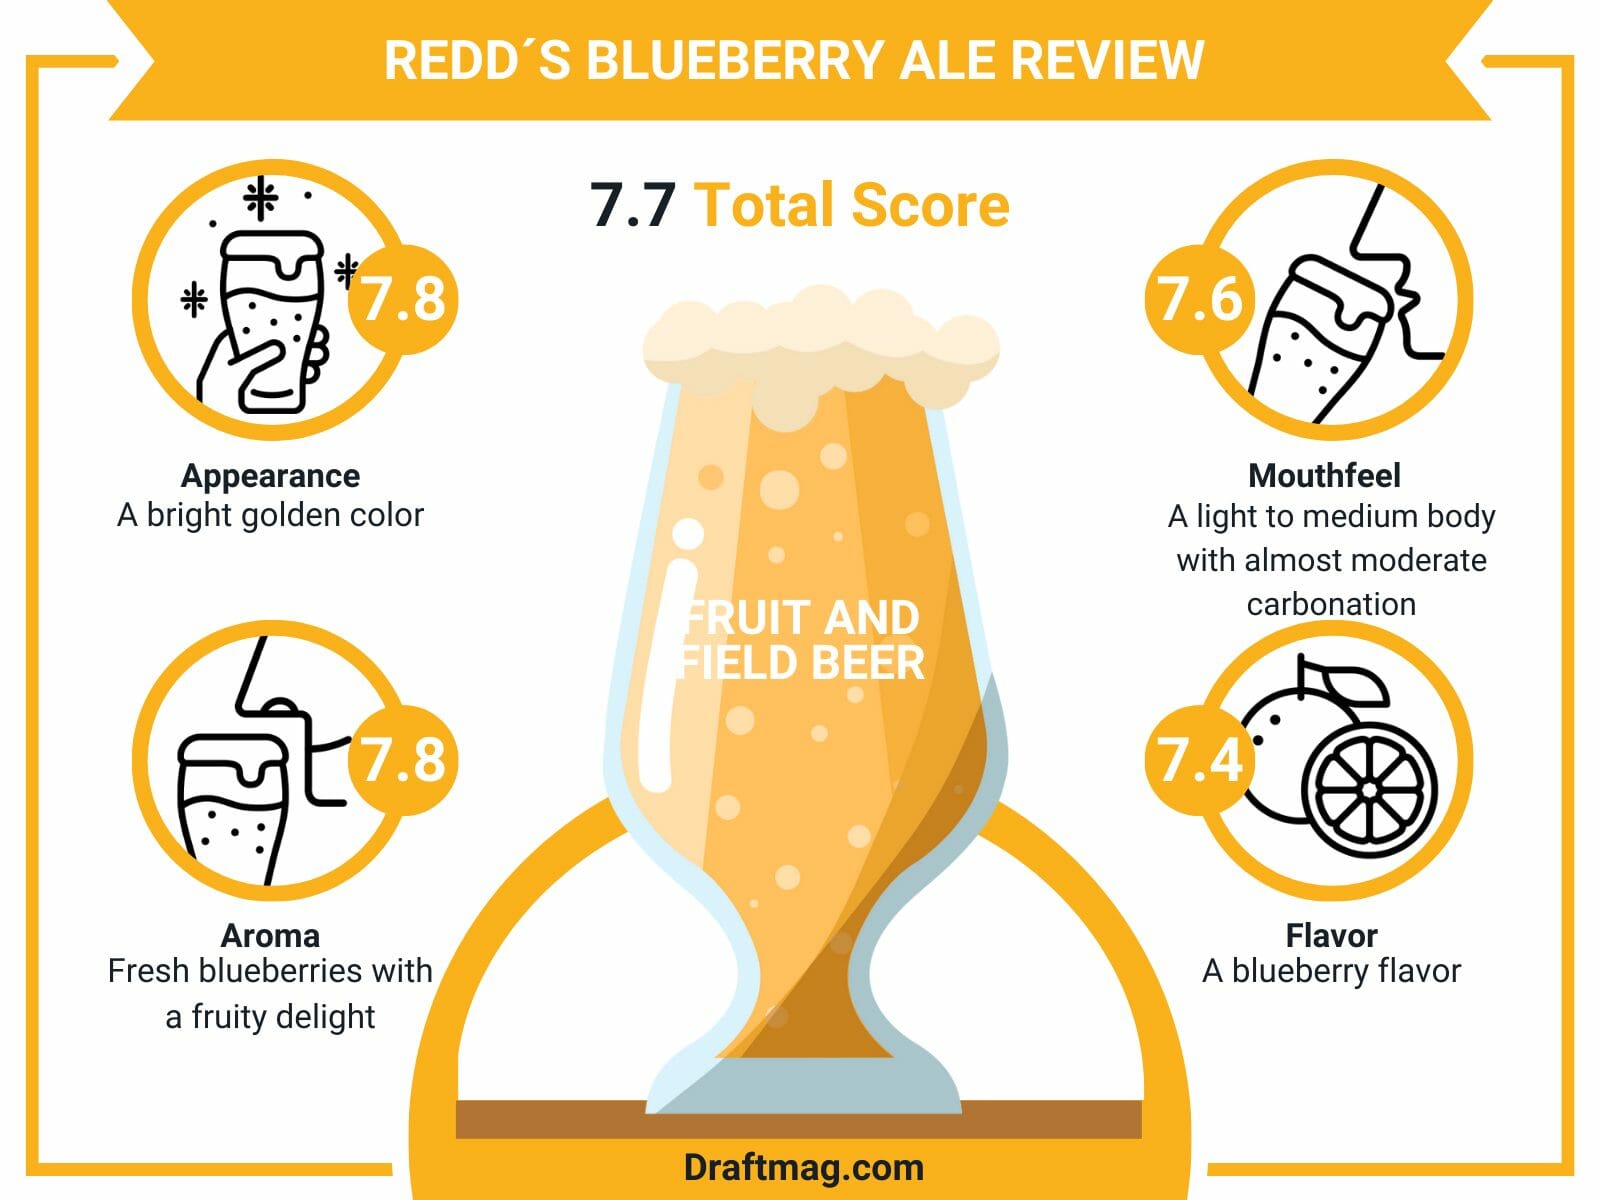 Redd´s blueberry ale review infographic